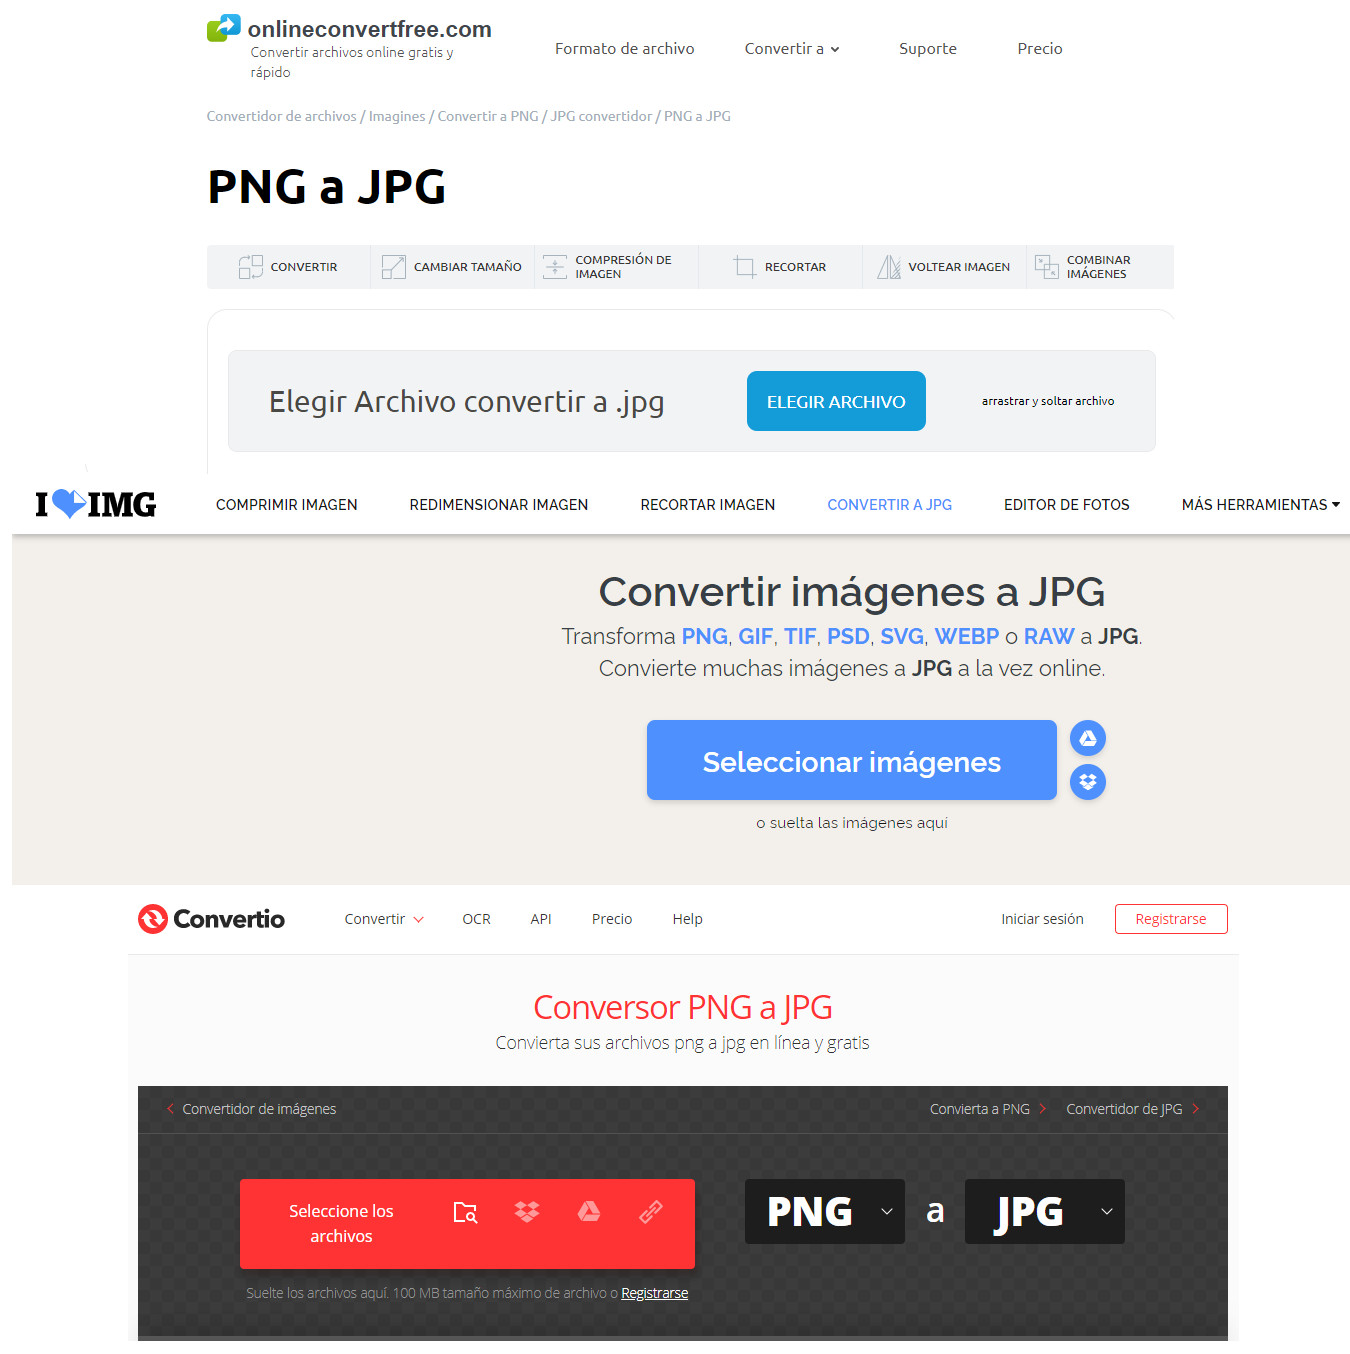 How to convert PNG images to JPG without losing quality - Without free programs